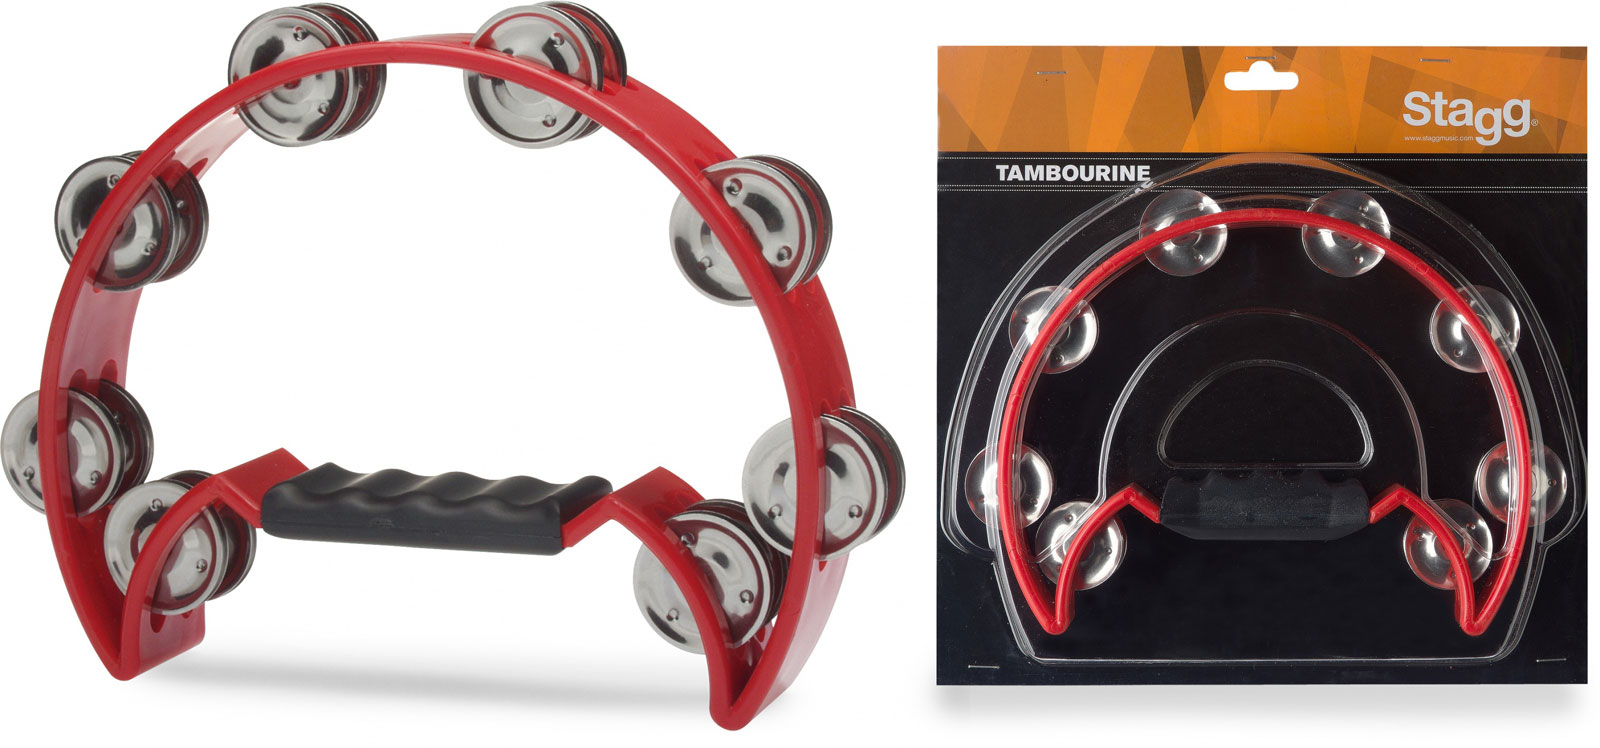 STAGG TAMBOURIN 1/2 LUNE 16 CYMBALETTES ROUGE